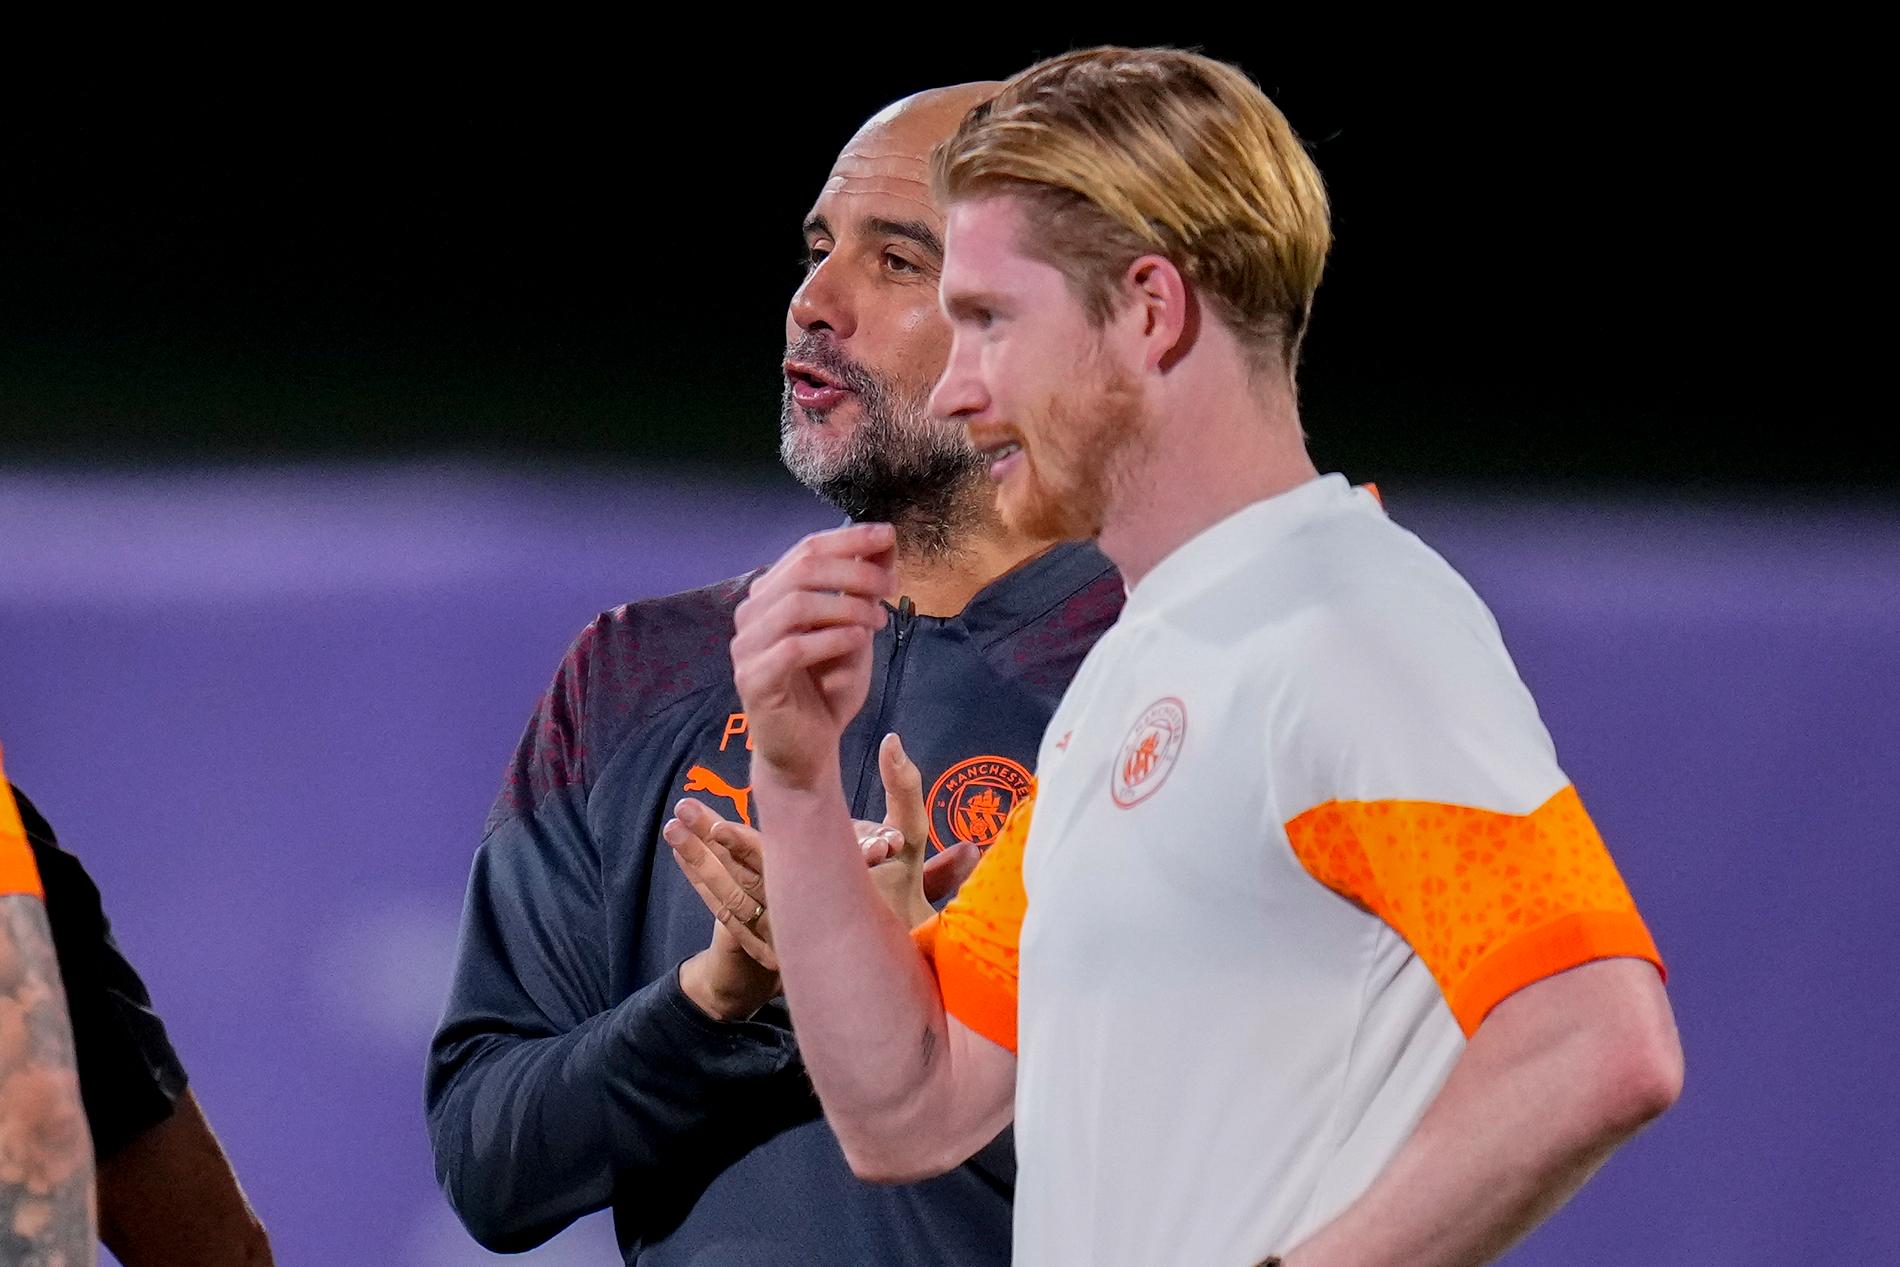 In training: Kevin De Bruyne is in Saudi Arabia, but he is a spectator when Manchester City plays the Club World Cup.  The Belgian has been training after being absent due to injury since August.